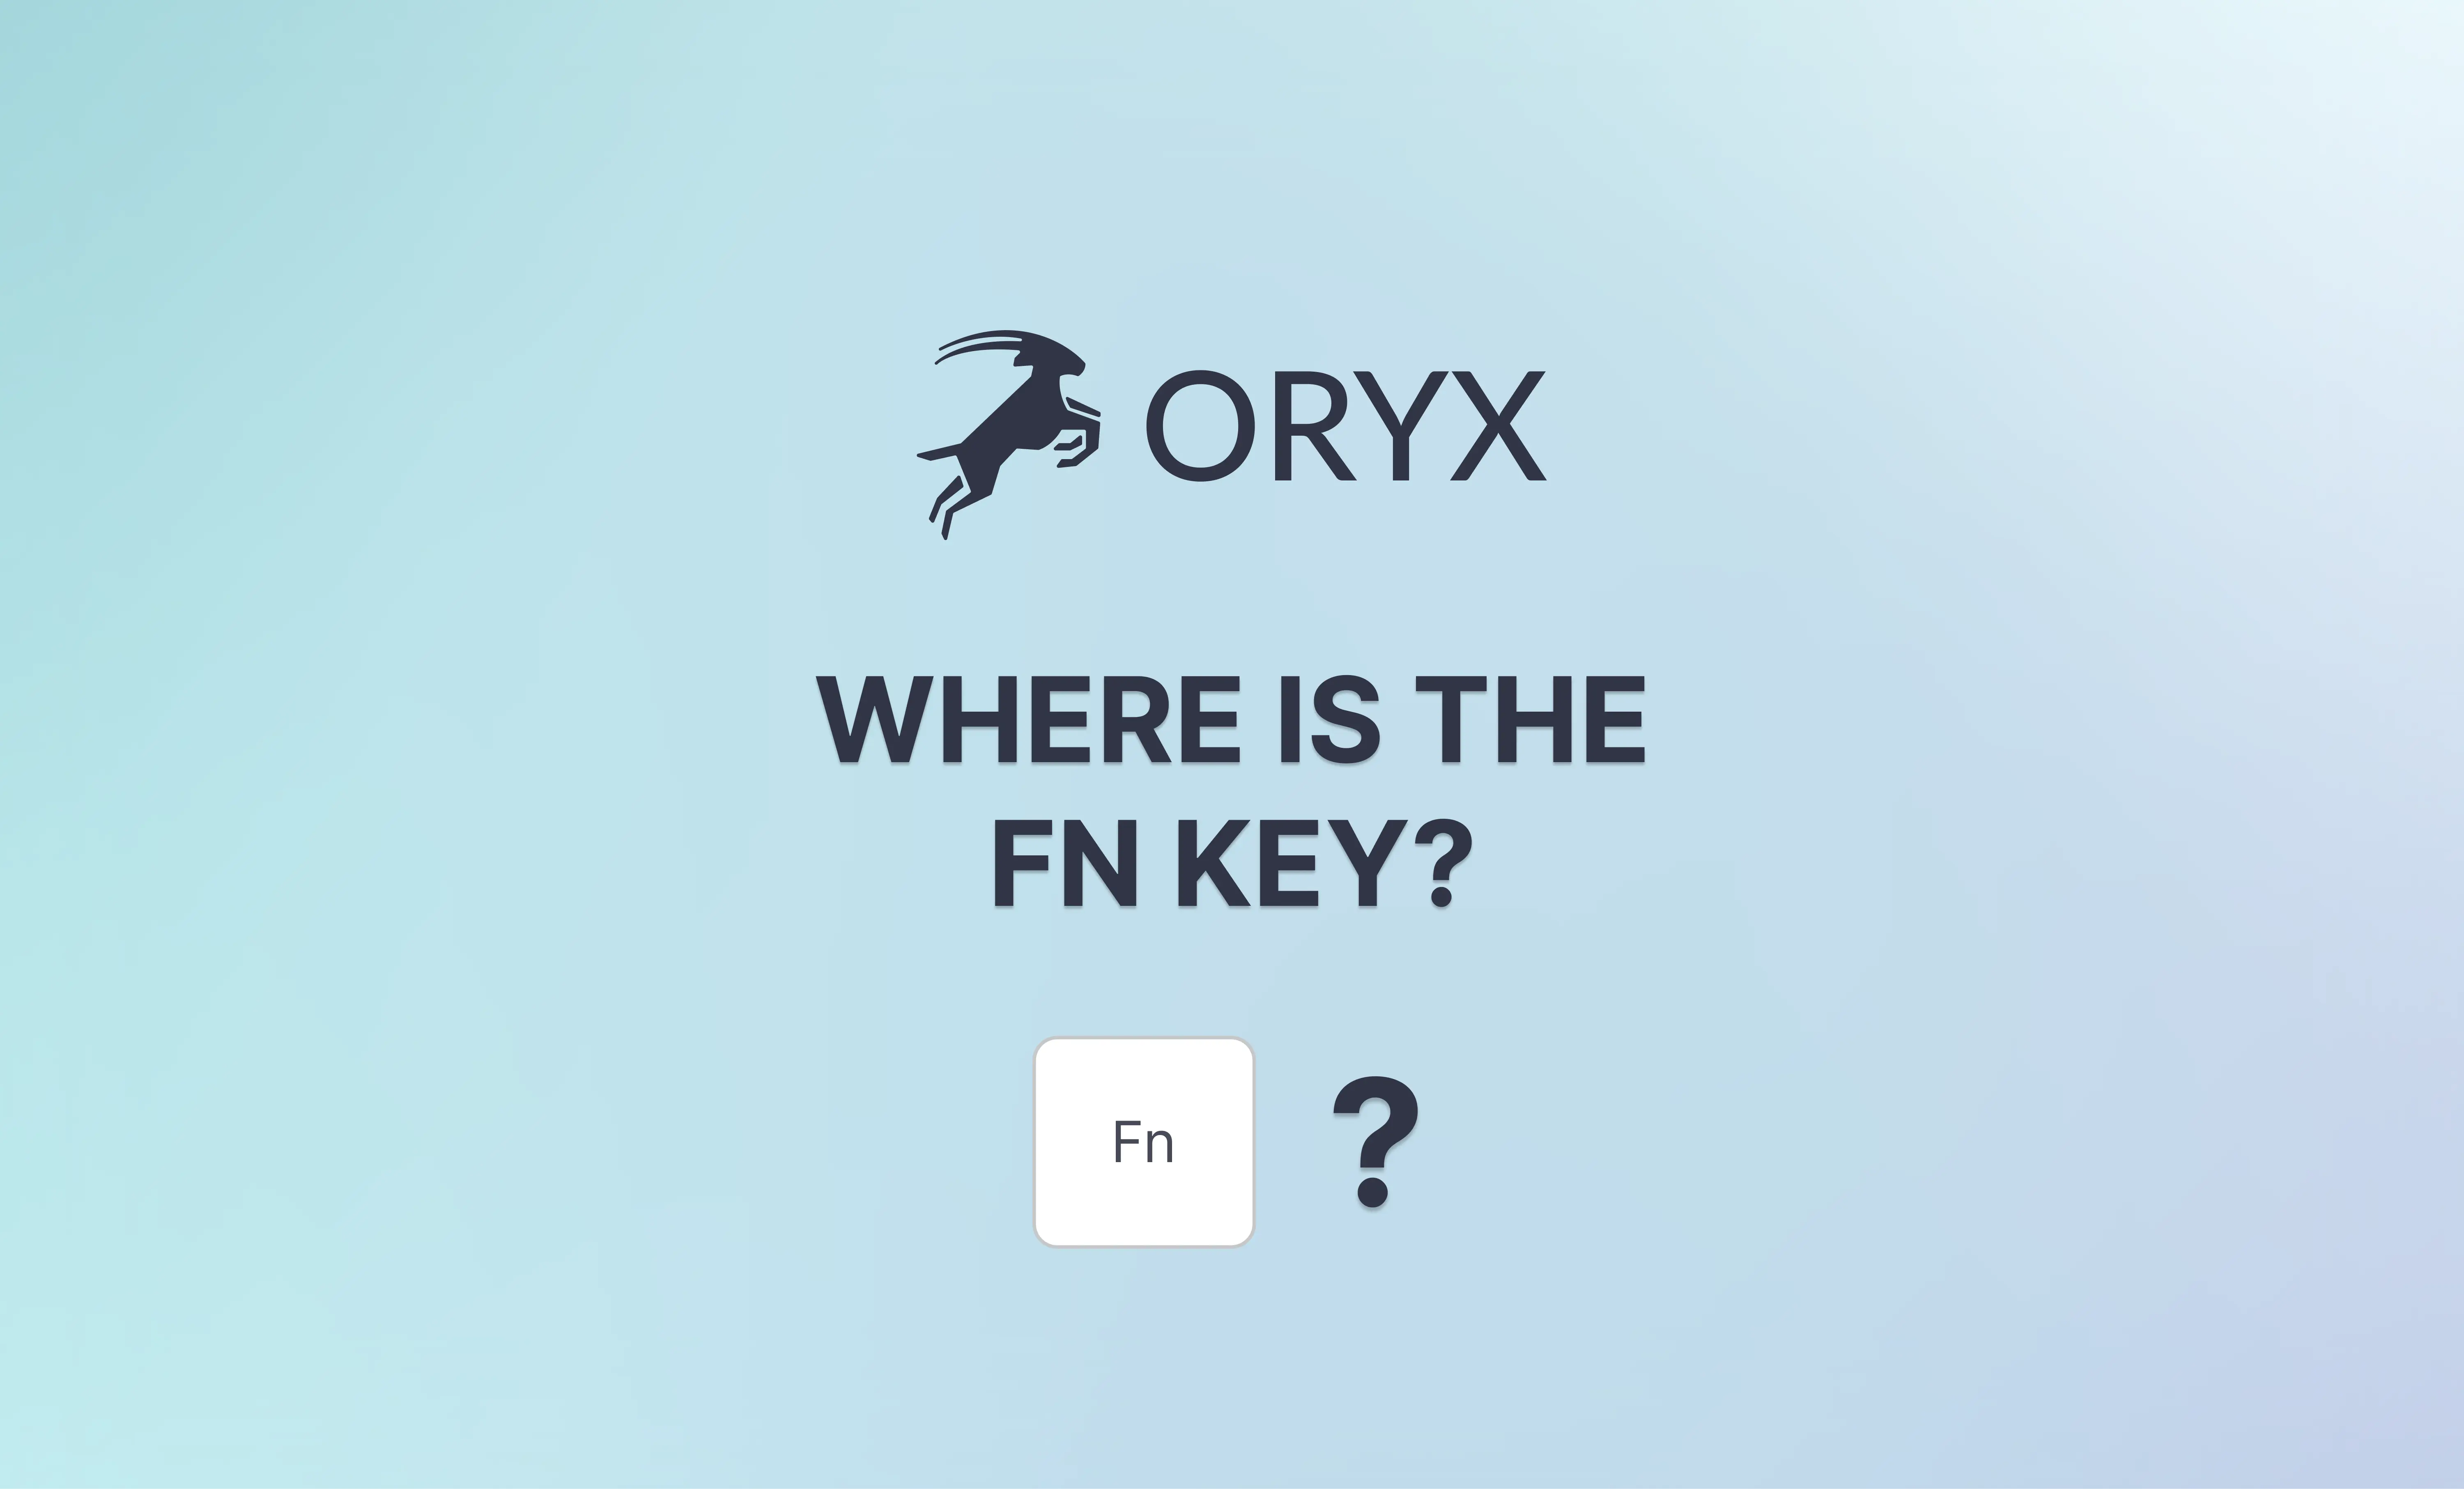 Where is the Fn key?